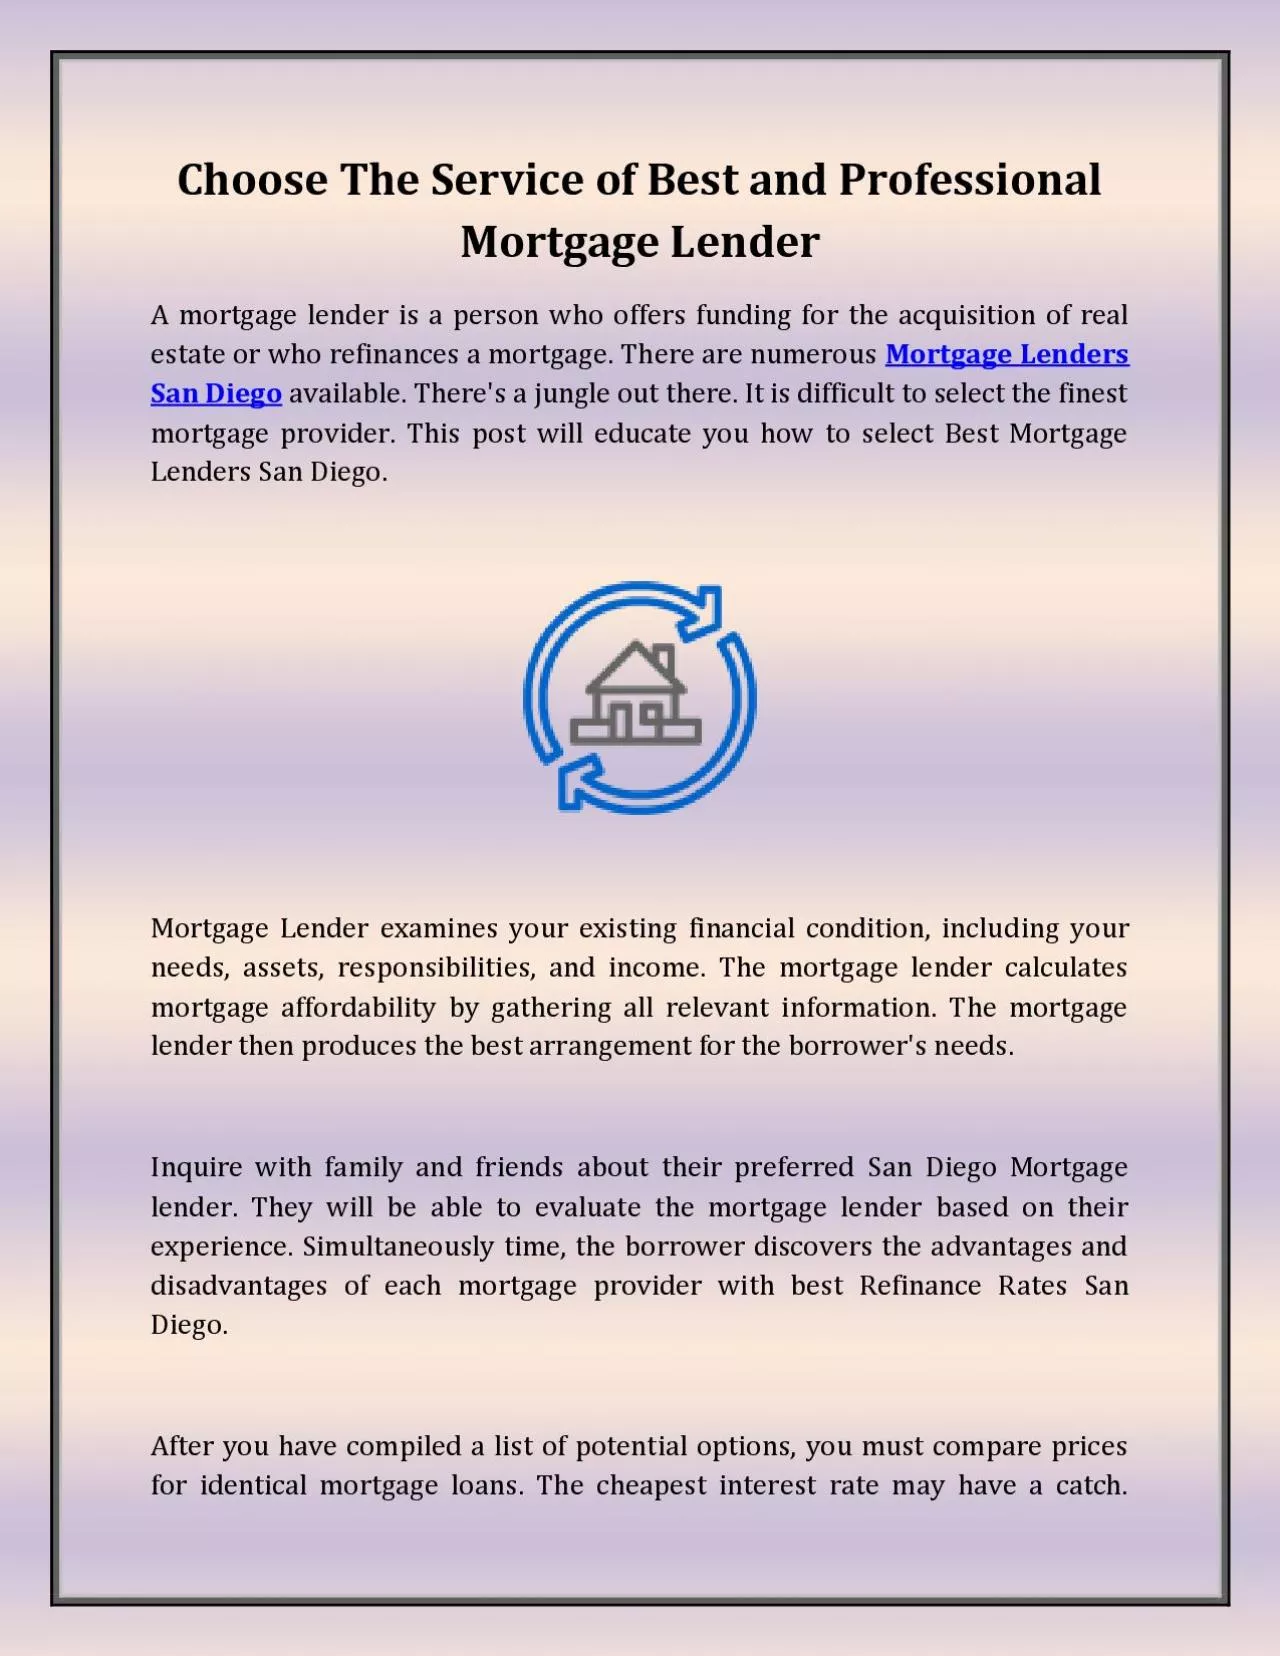 Choose The Service of Best and Professional Mortgage Lender